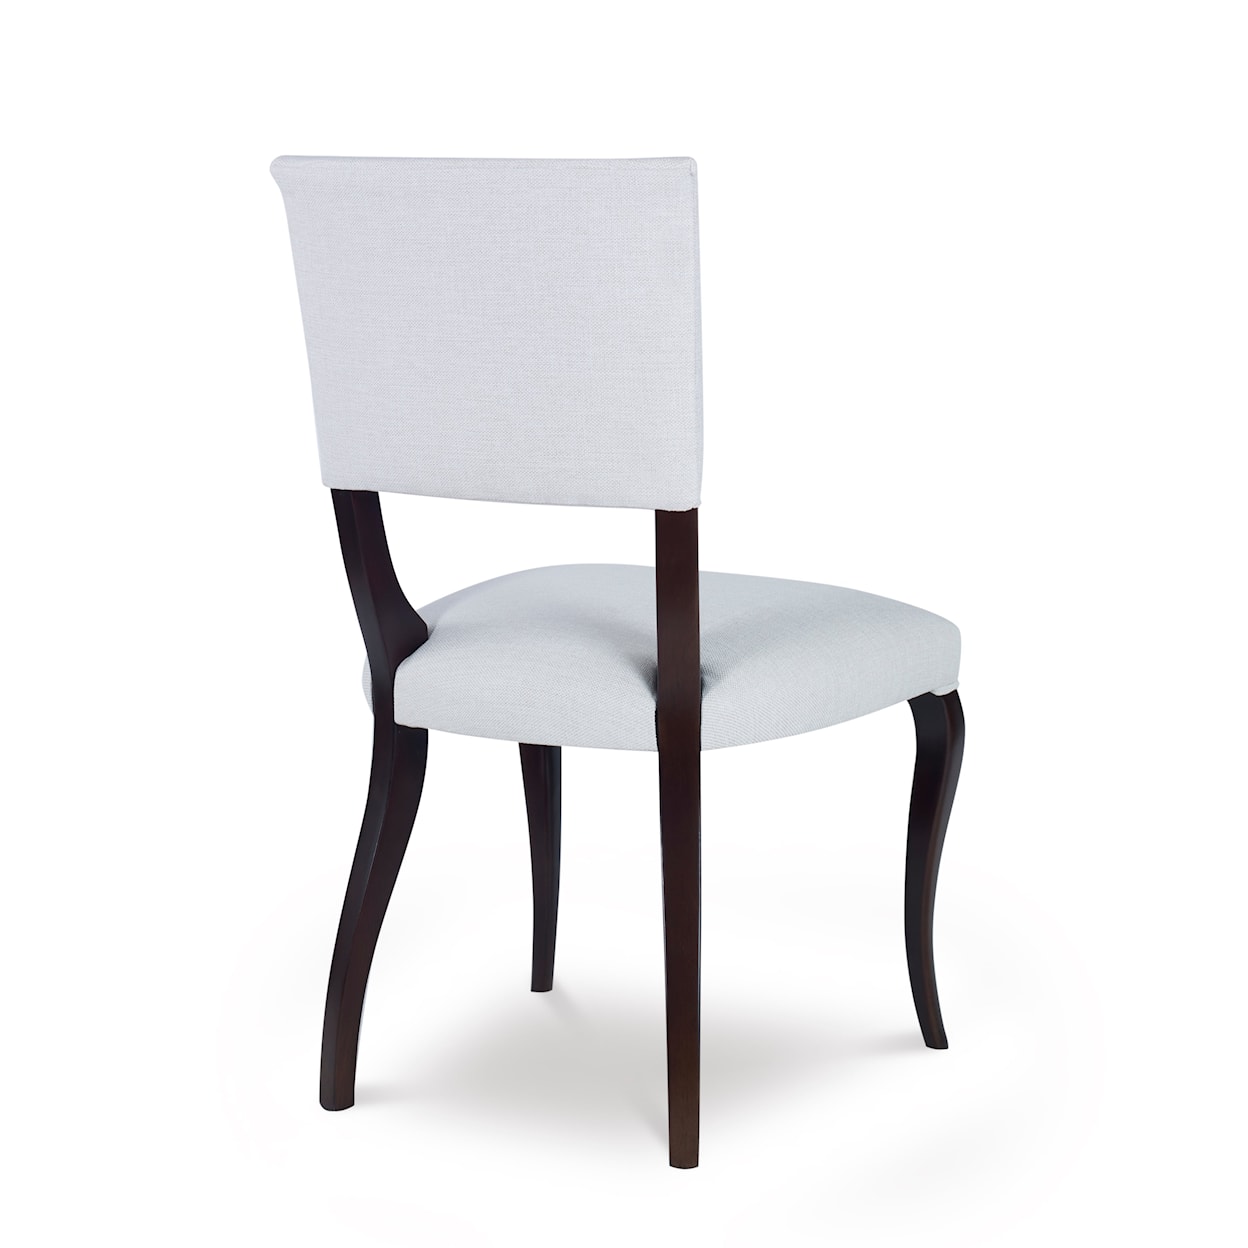 Century Century Chair Dining Side Chair